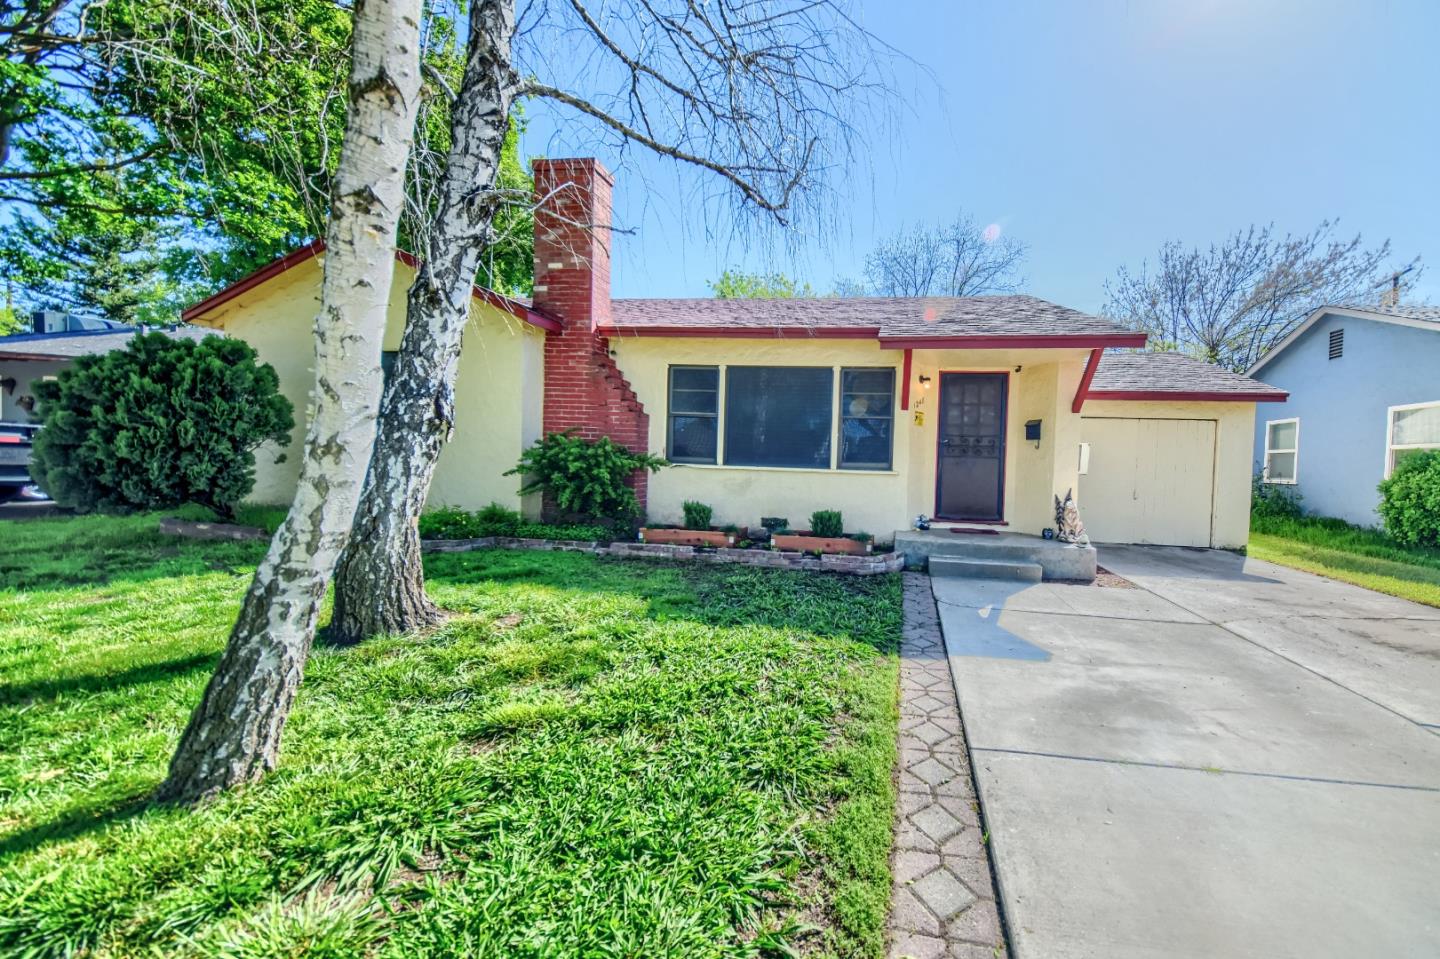 Photo of 1248 Grinnell St in Modesto, CA